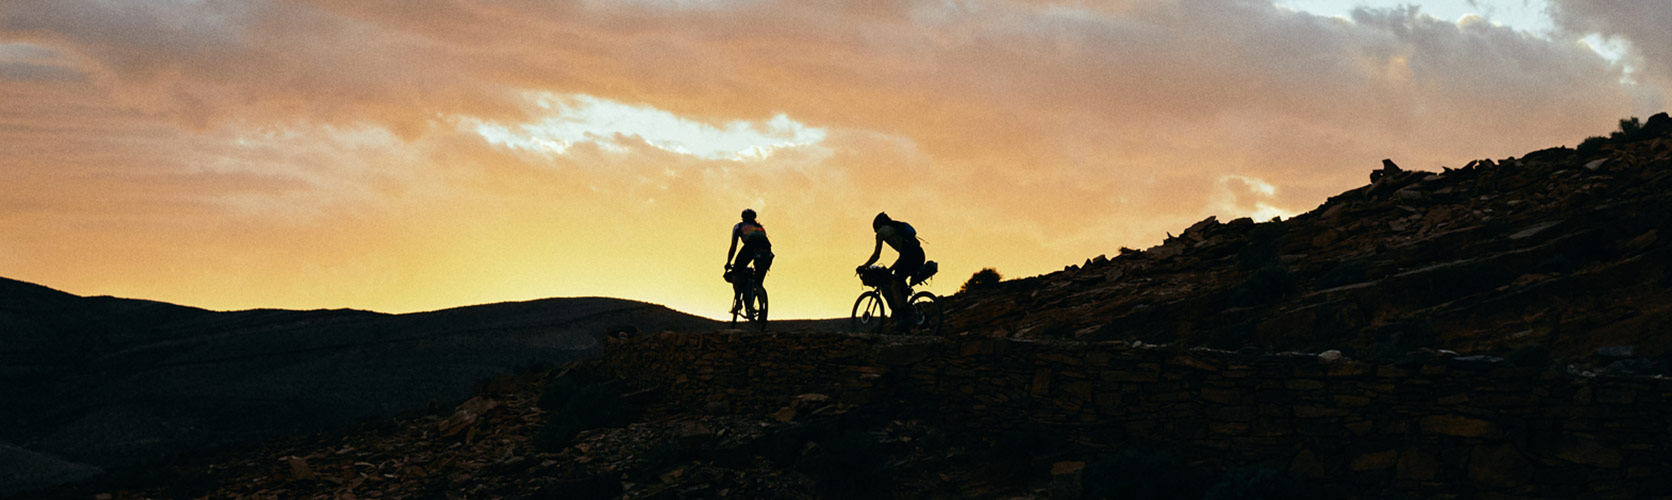 pedaled-adventure-film-archives